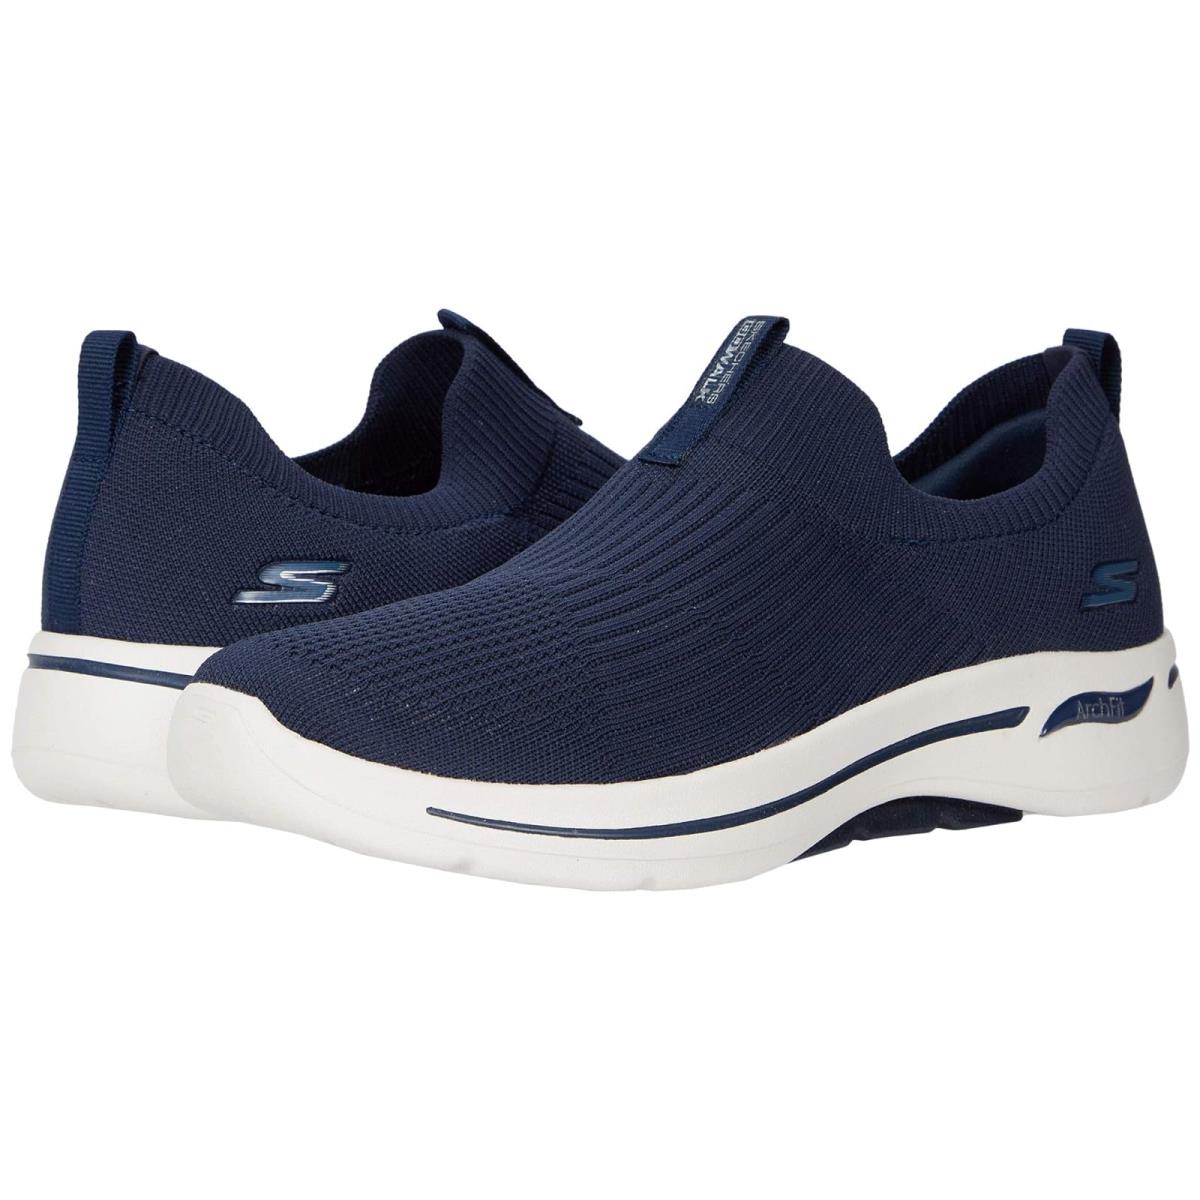 Woman`s Shoes Skechers Performance Go Walk Arch Fit - 124409 Navy